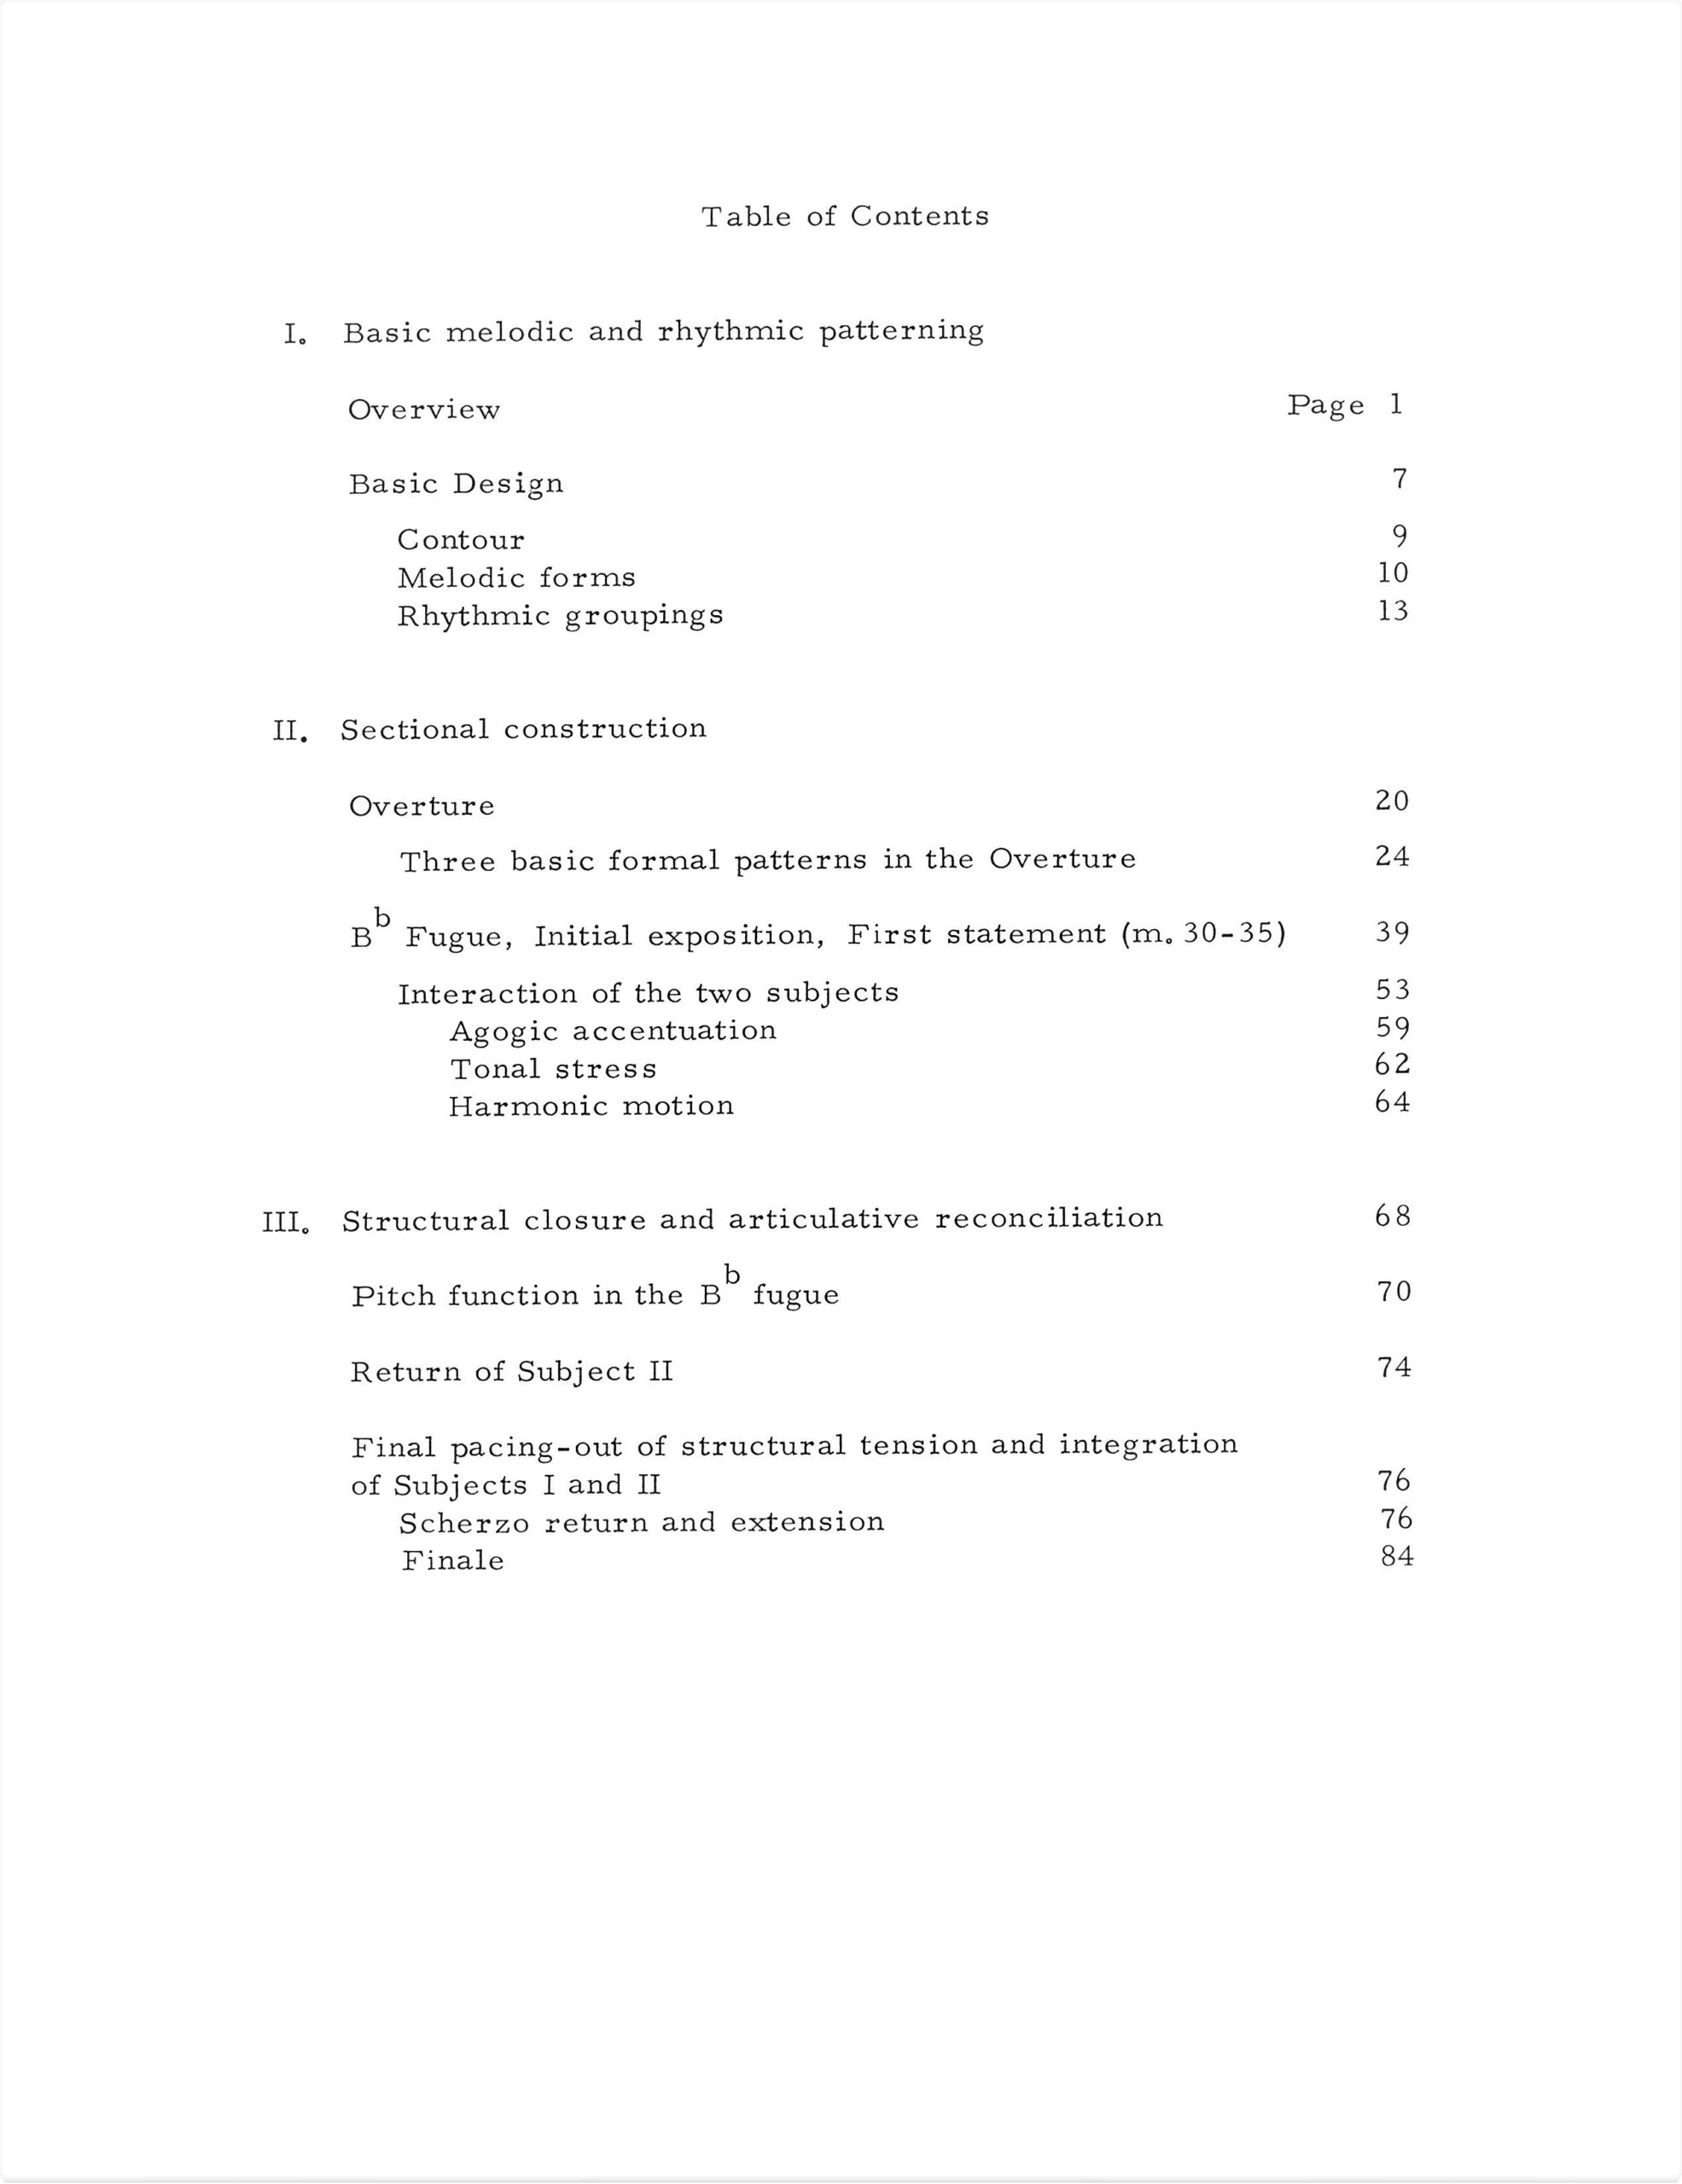 PhD paper (March 1972), table of contents